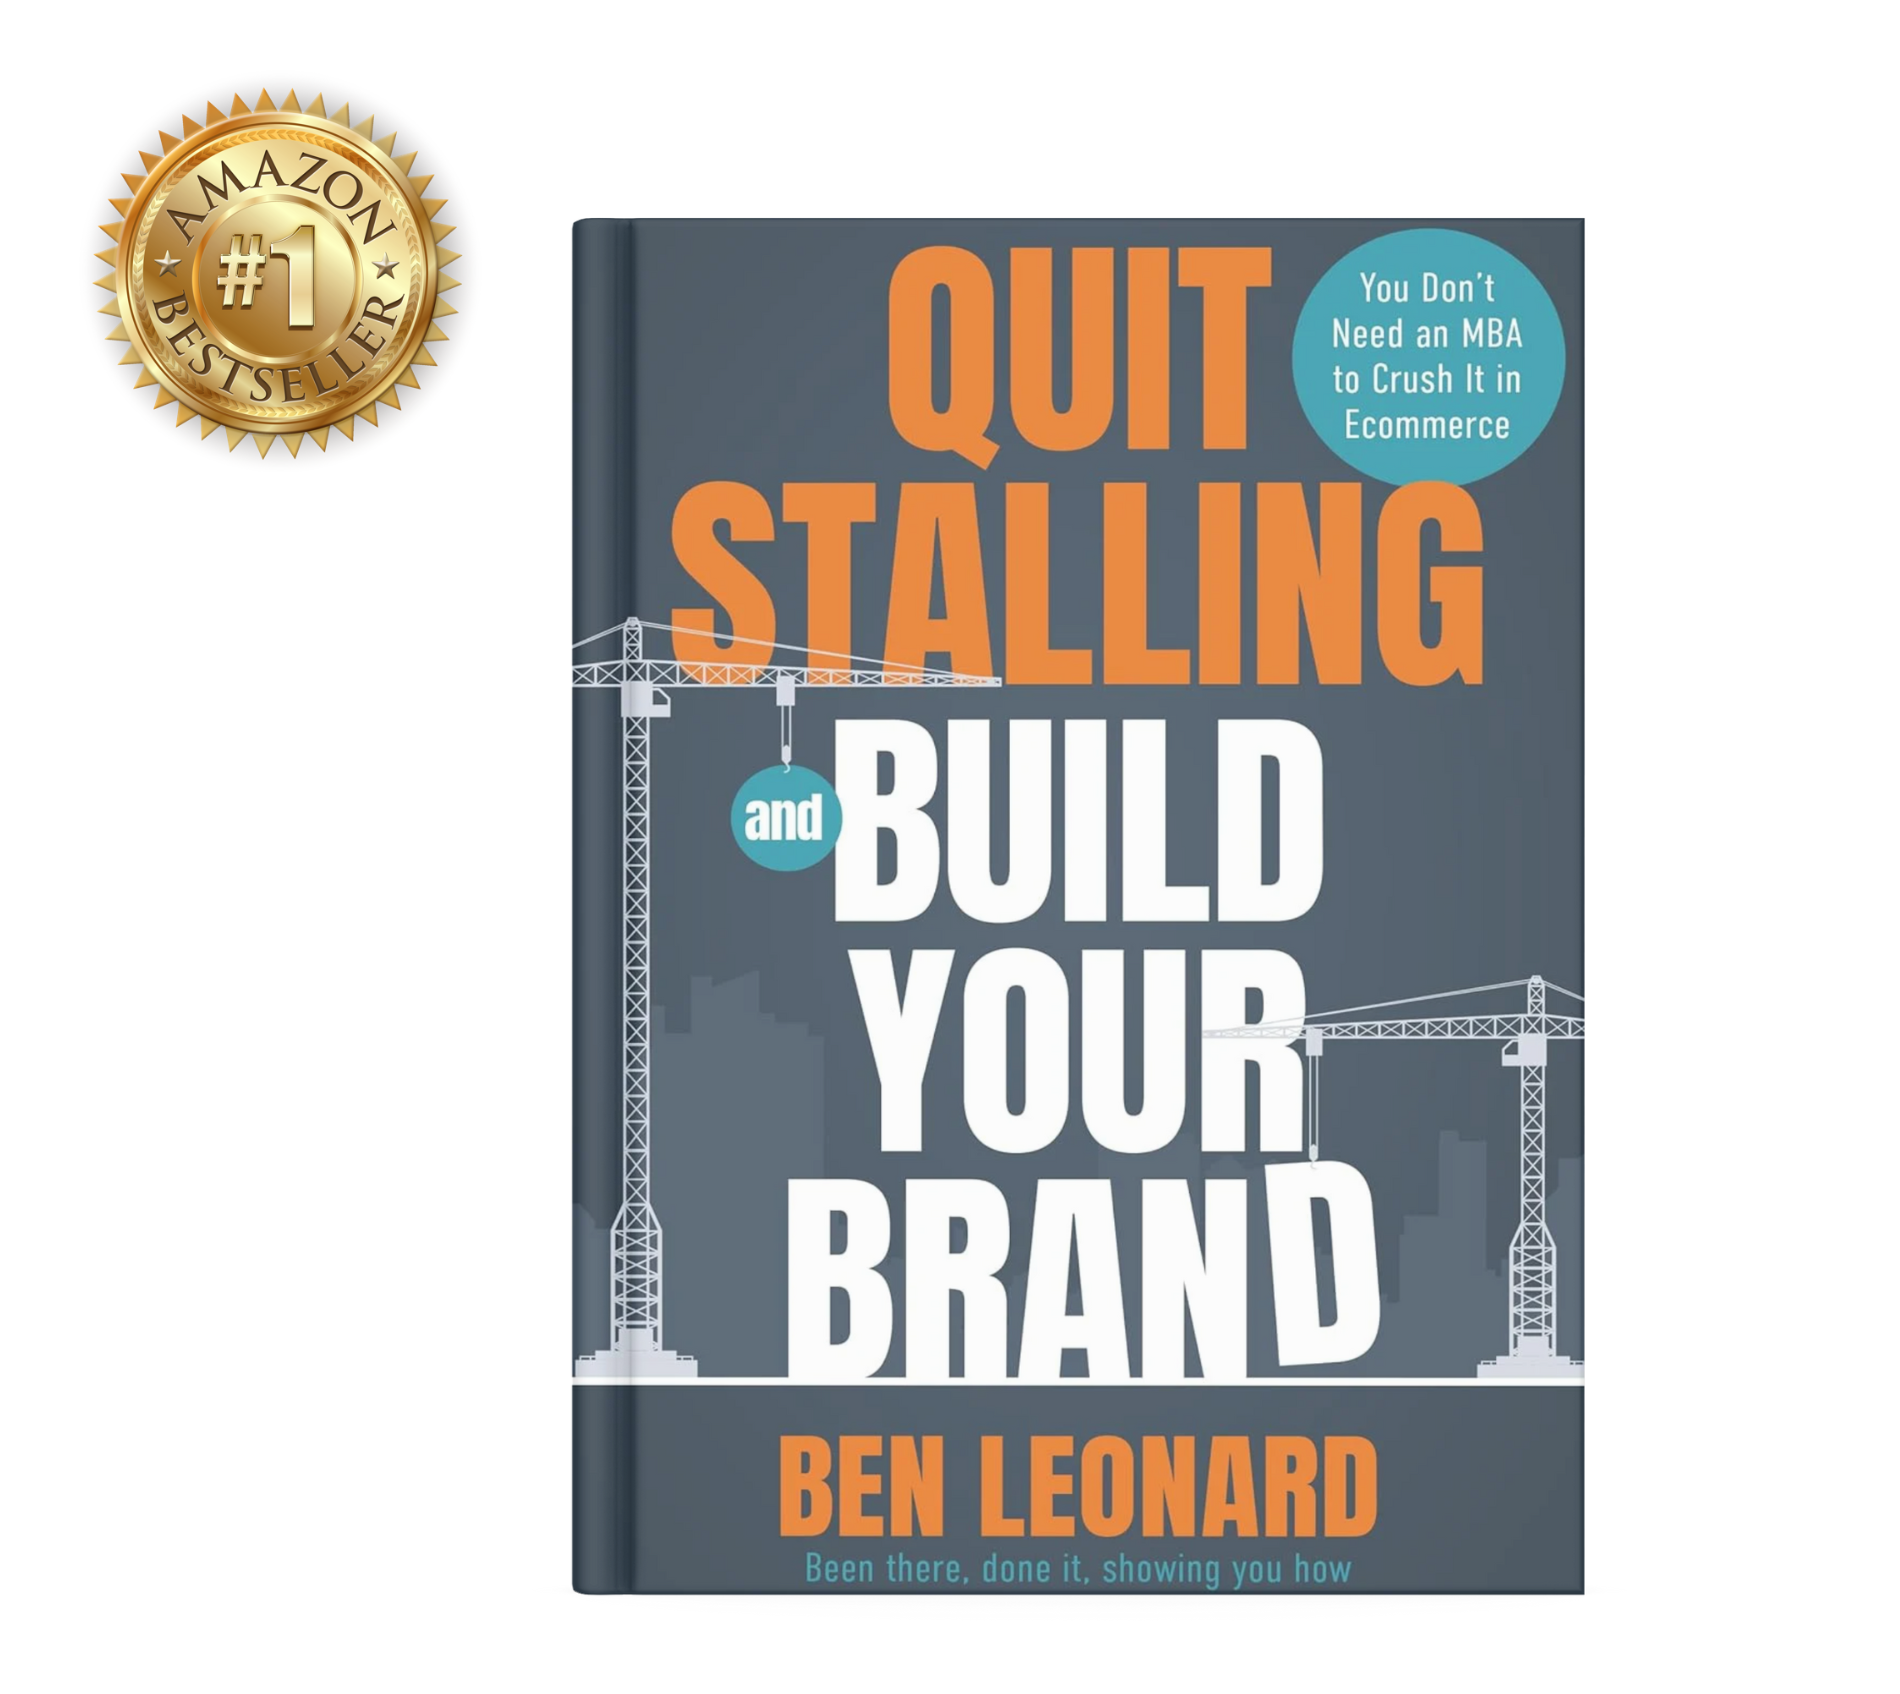 Amazon #1 bestseller book author Amazon KDP best agency Marie O'Shea Shea Publishing Quit Stalling and Build Your Brand Ben Leonard Ecommerce Book